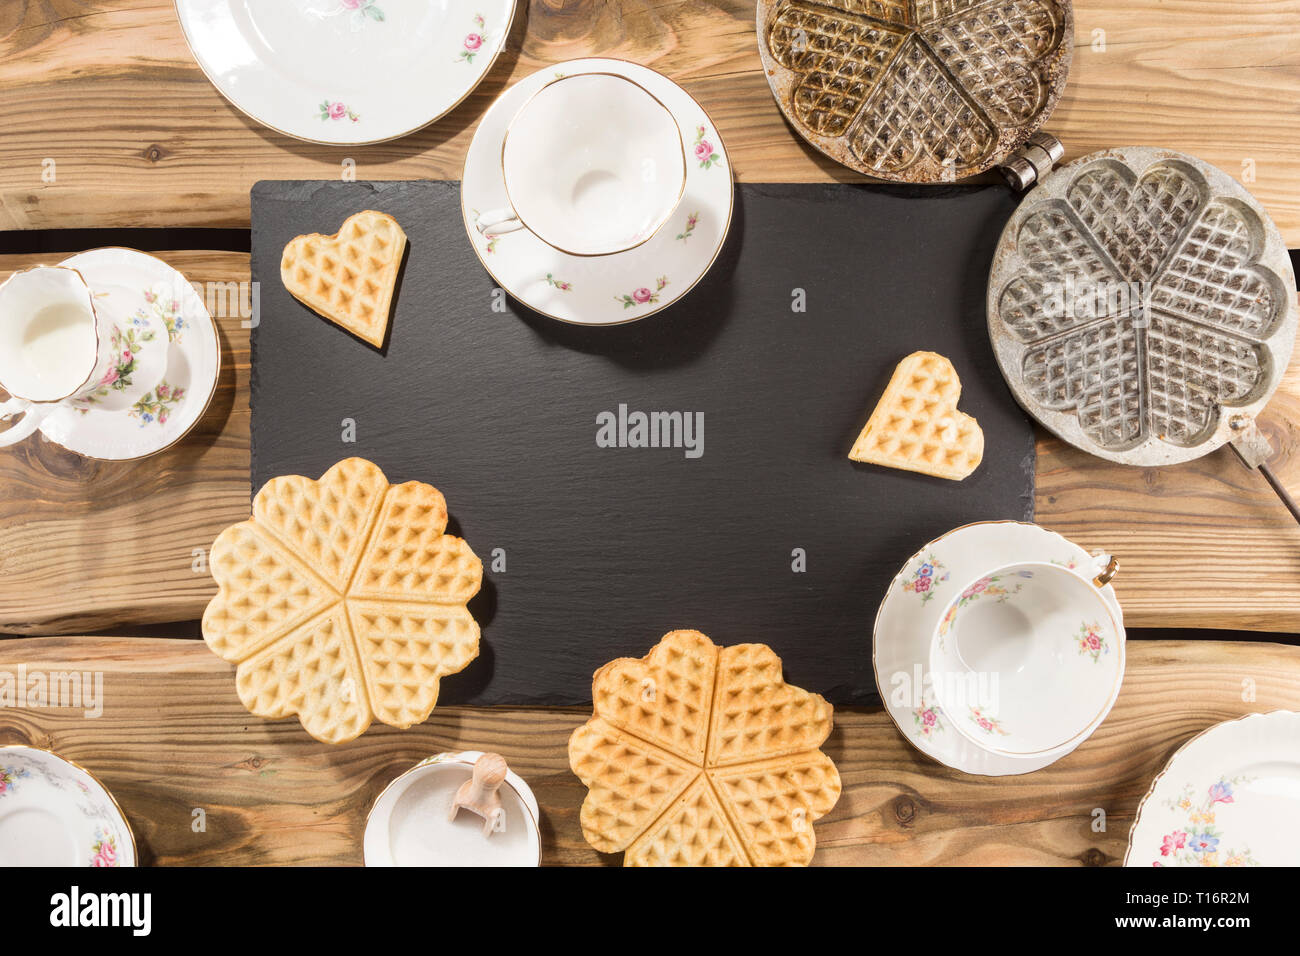 Delicious waffles, traditional ancient waffle iron arranged on rustic wood planks with slate board and English porcelain. Shot from above, flat lay. Stock Photo